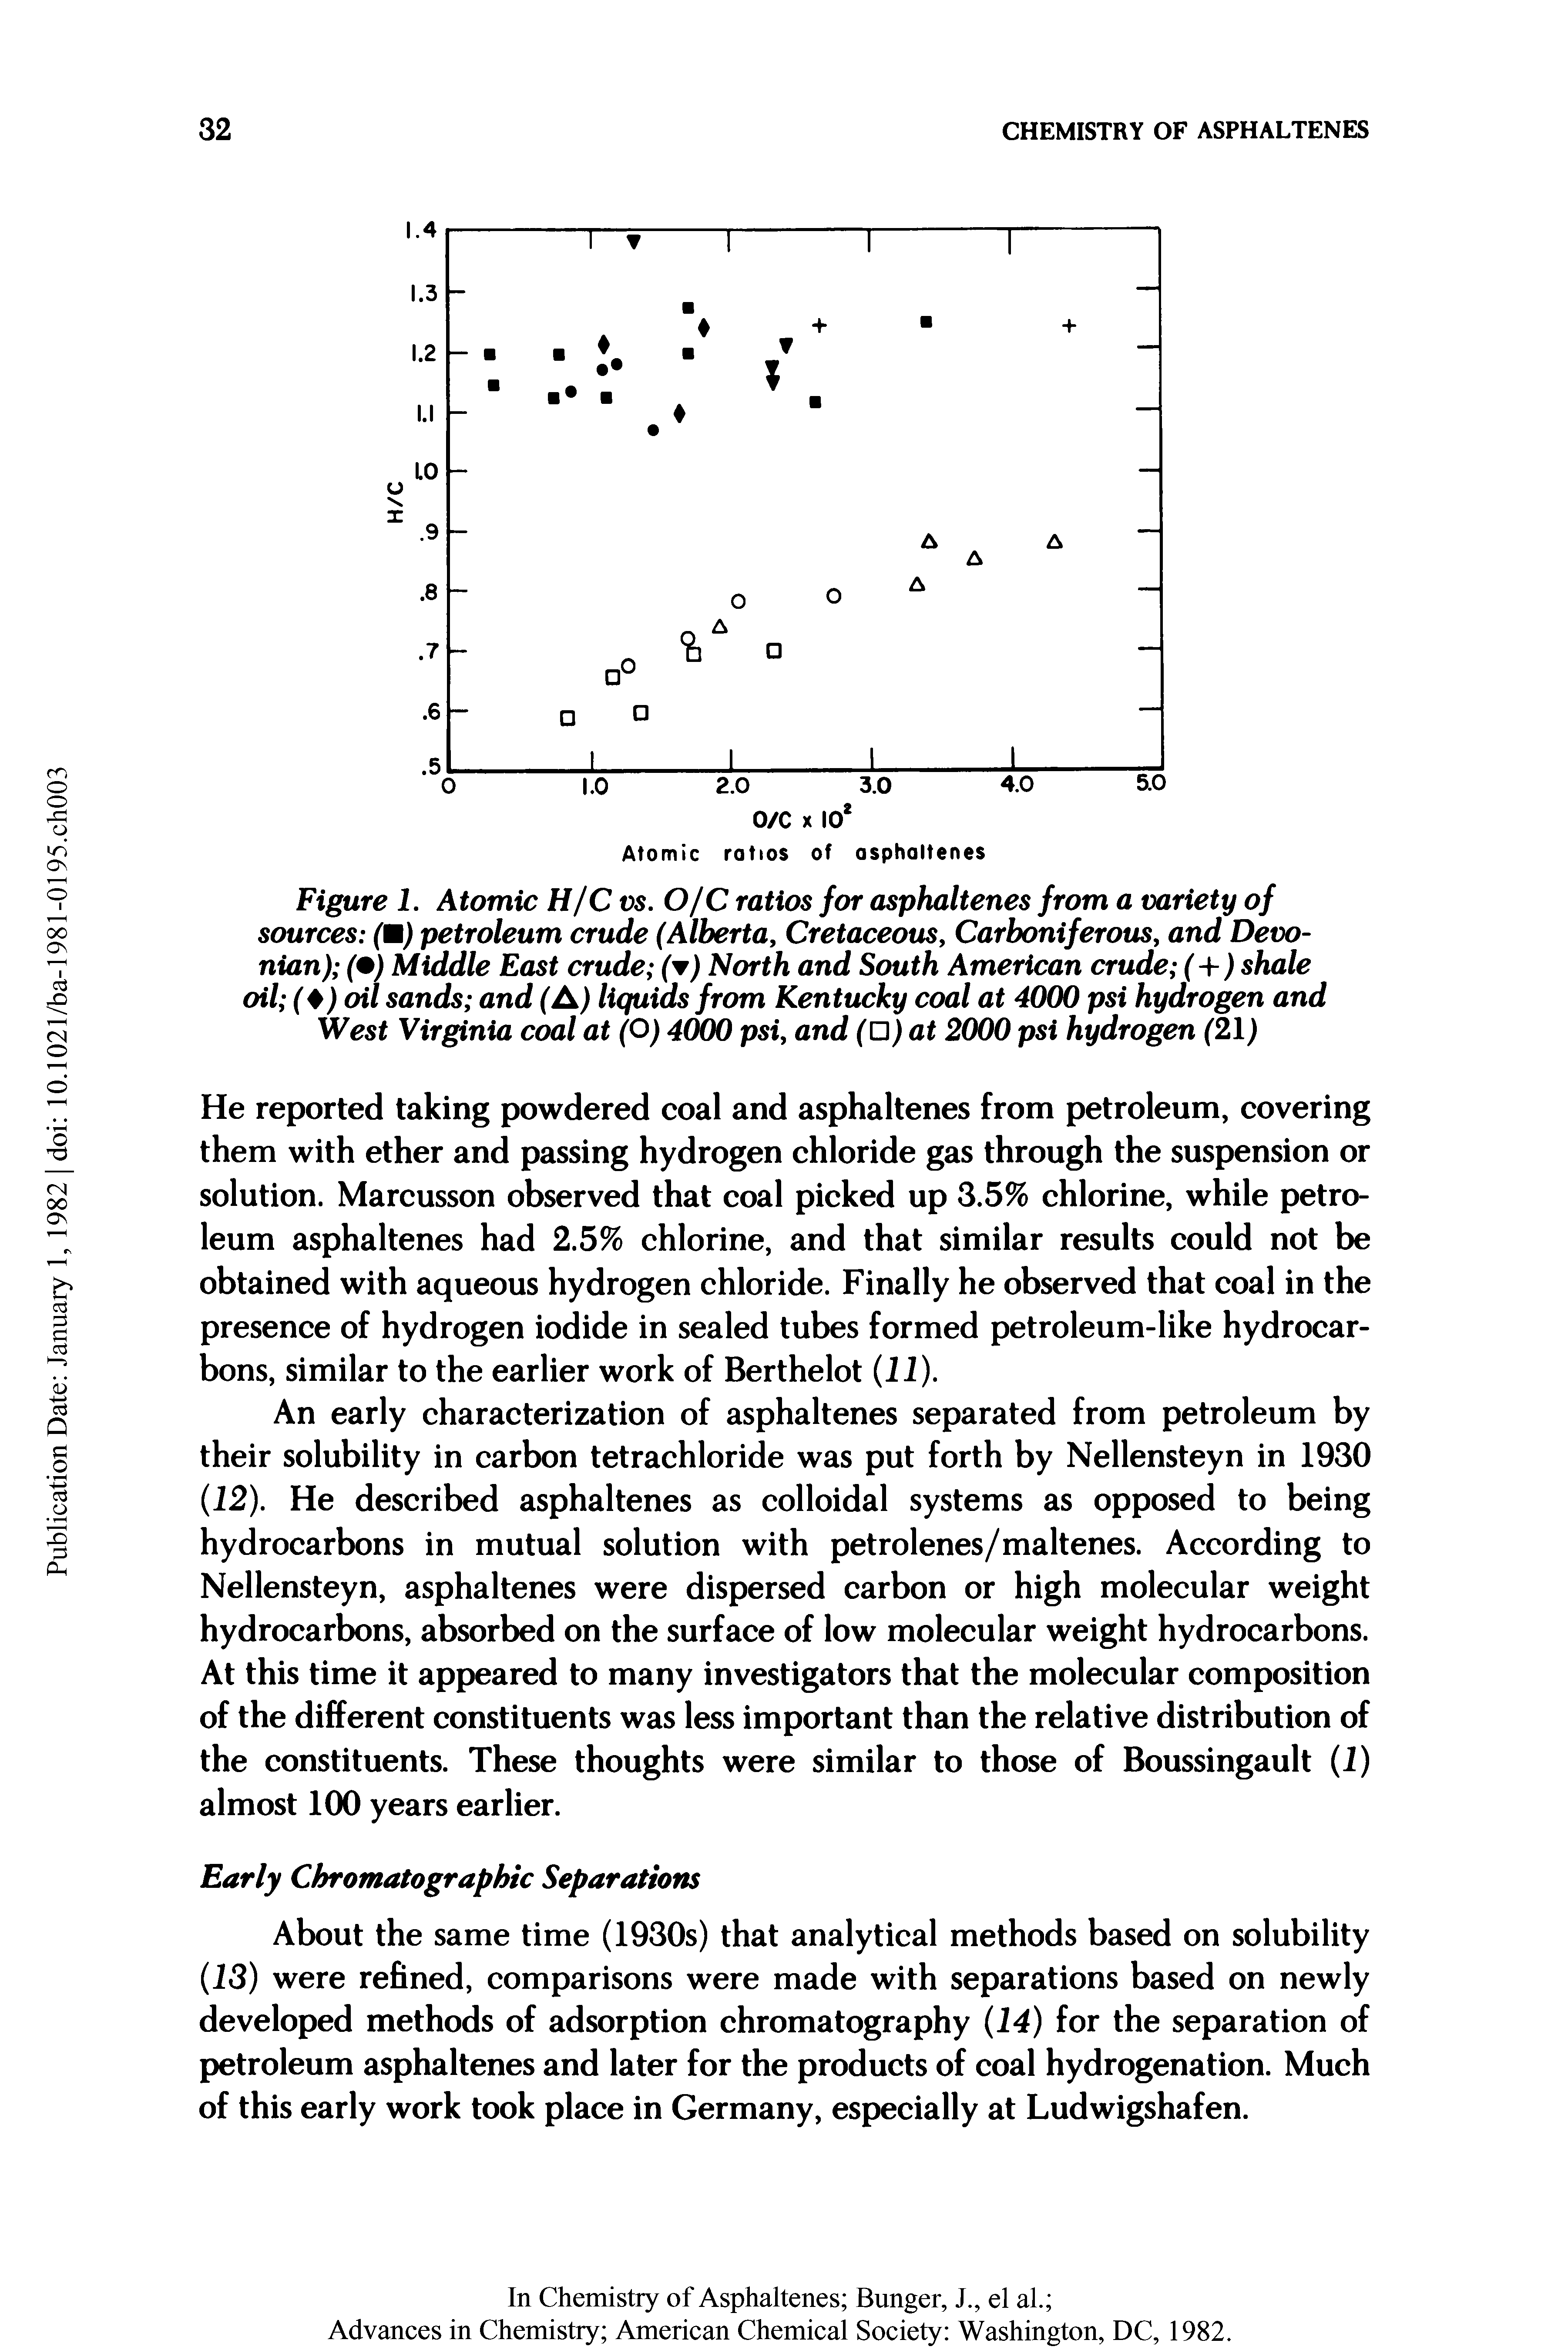 Figure 1. Atomic H/C vs. O/C ratios for asphaltenes from a variety of sources (M) petroleum crude (Alberta, Cretaceous, Carboniferous, and Devonian) ( ) Middle East crude (w) North and South American crude (+) shale oil (+) oil sands and (A) liquids from Kentucky coal at 4000 psi hydrogen and West Virginia coal at (O) 4000 psi, and (U) at 2000 psi hydrogen (21)...